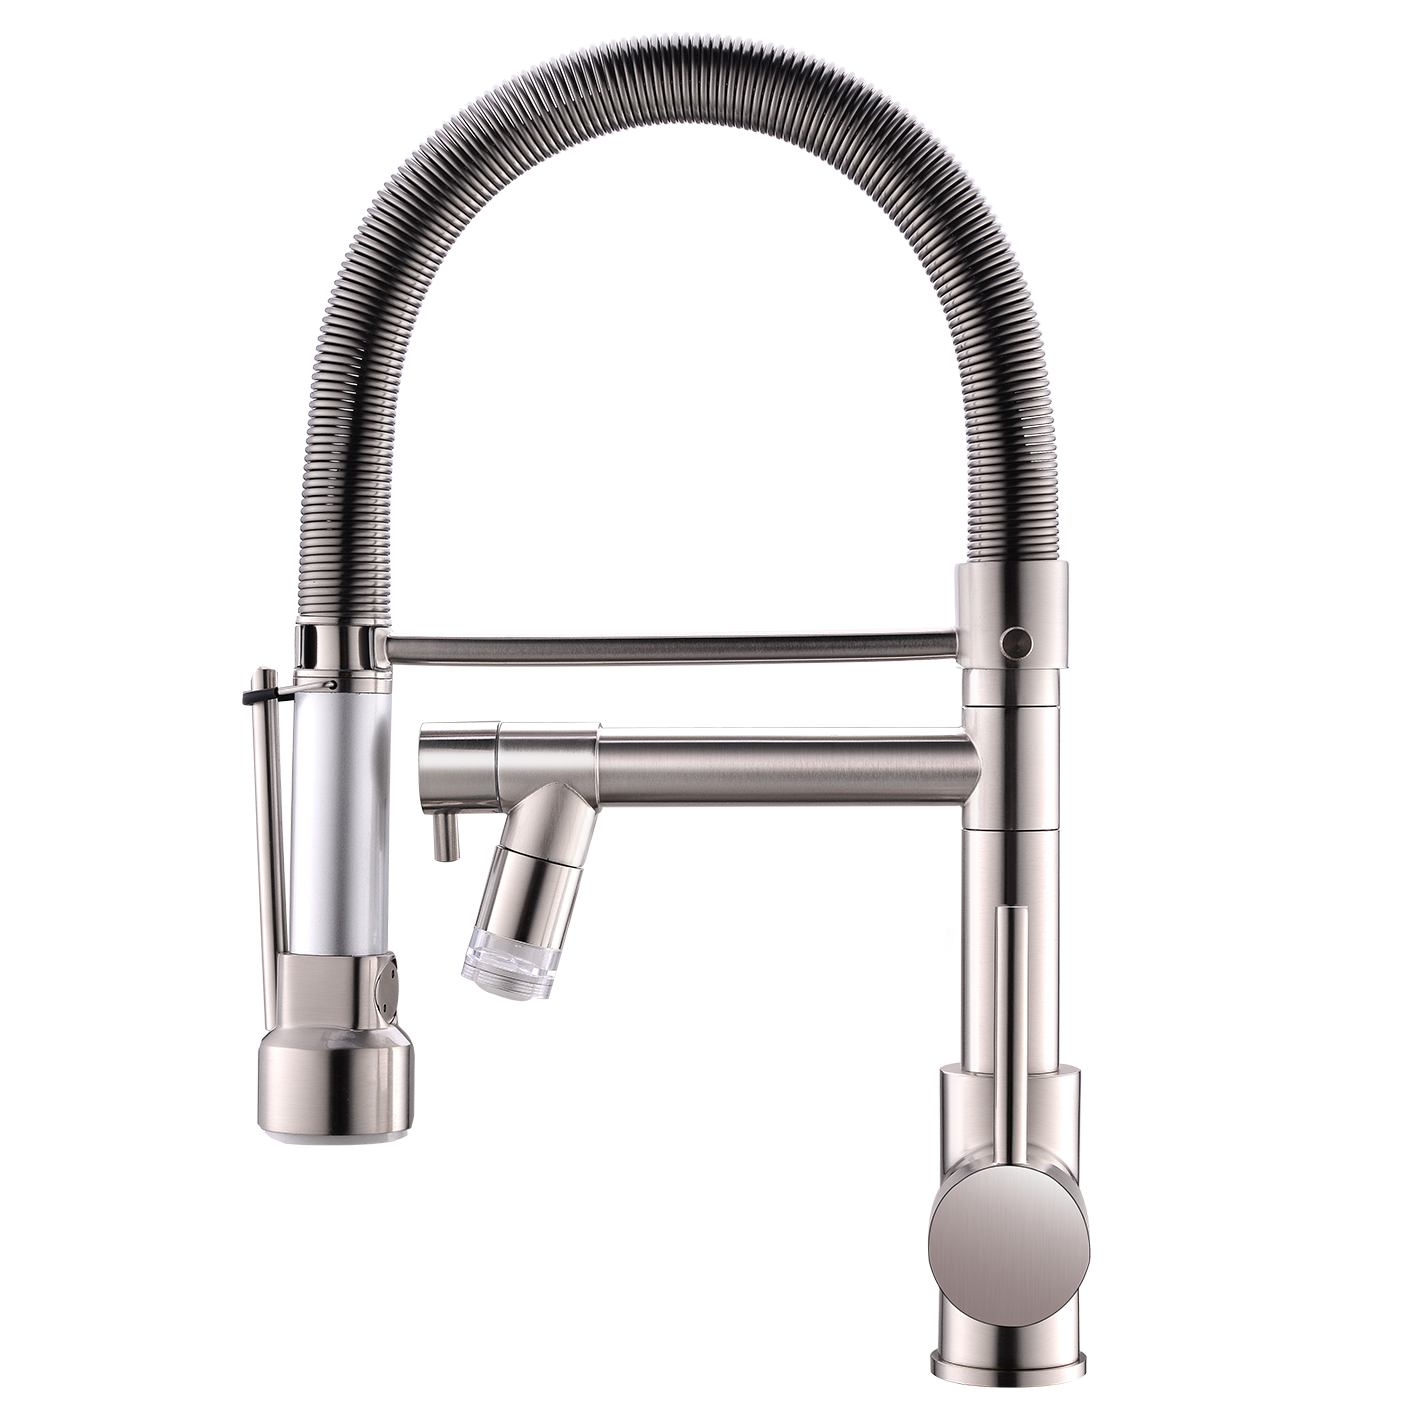 CASAINC Single-Handle No Sensor Pull-Down Sprayer Kitchen Faucet with Pot Filler and LED Light in Brushed Nickel-CASAINC